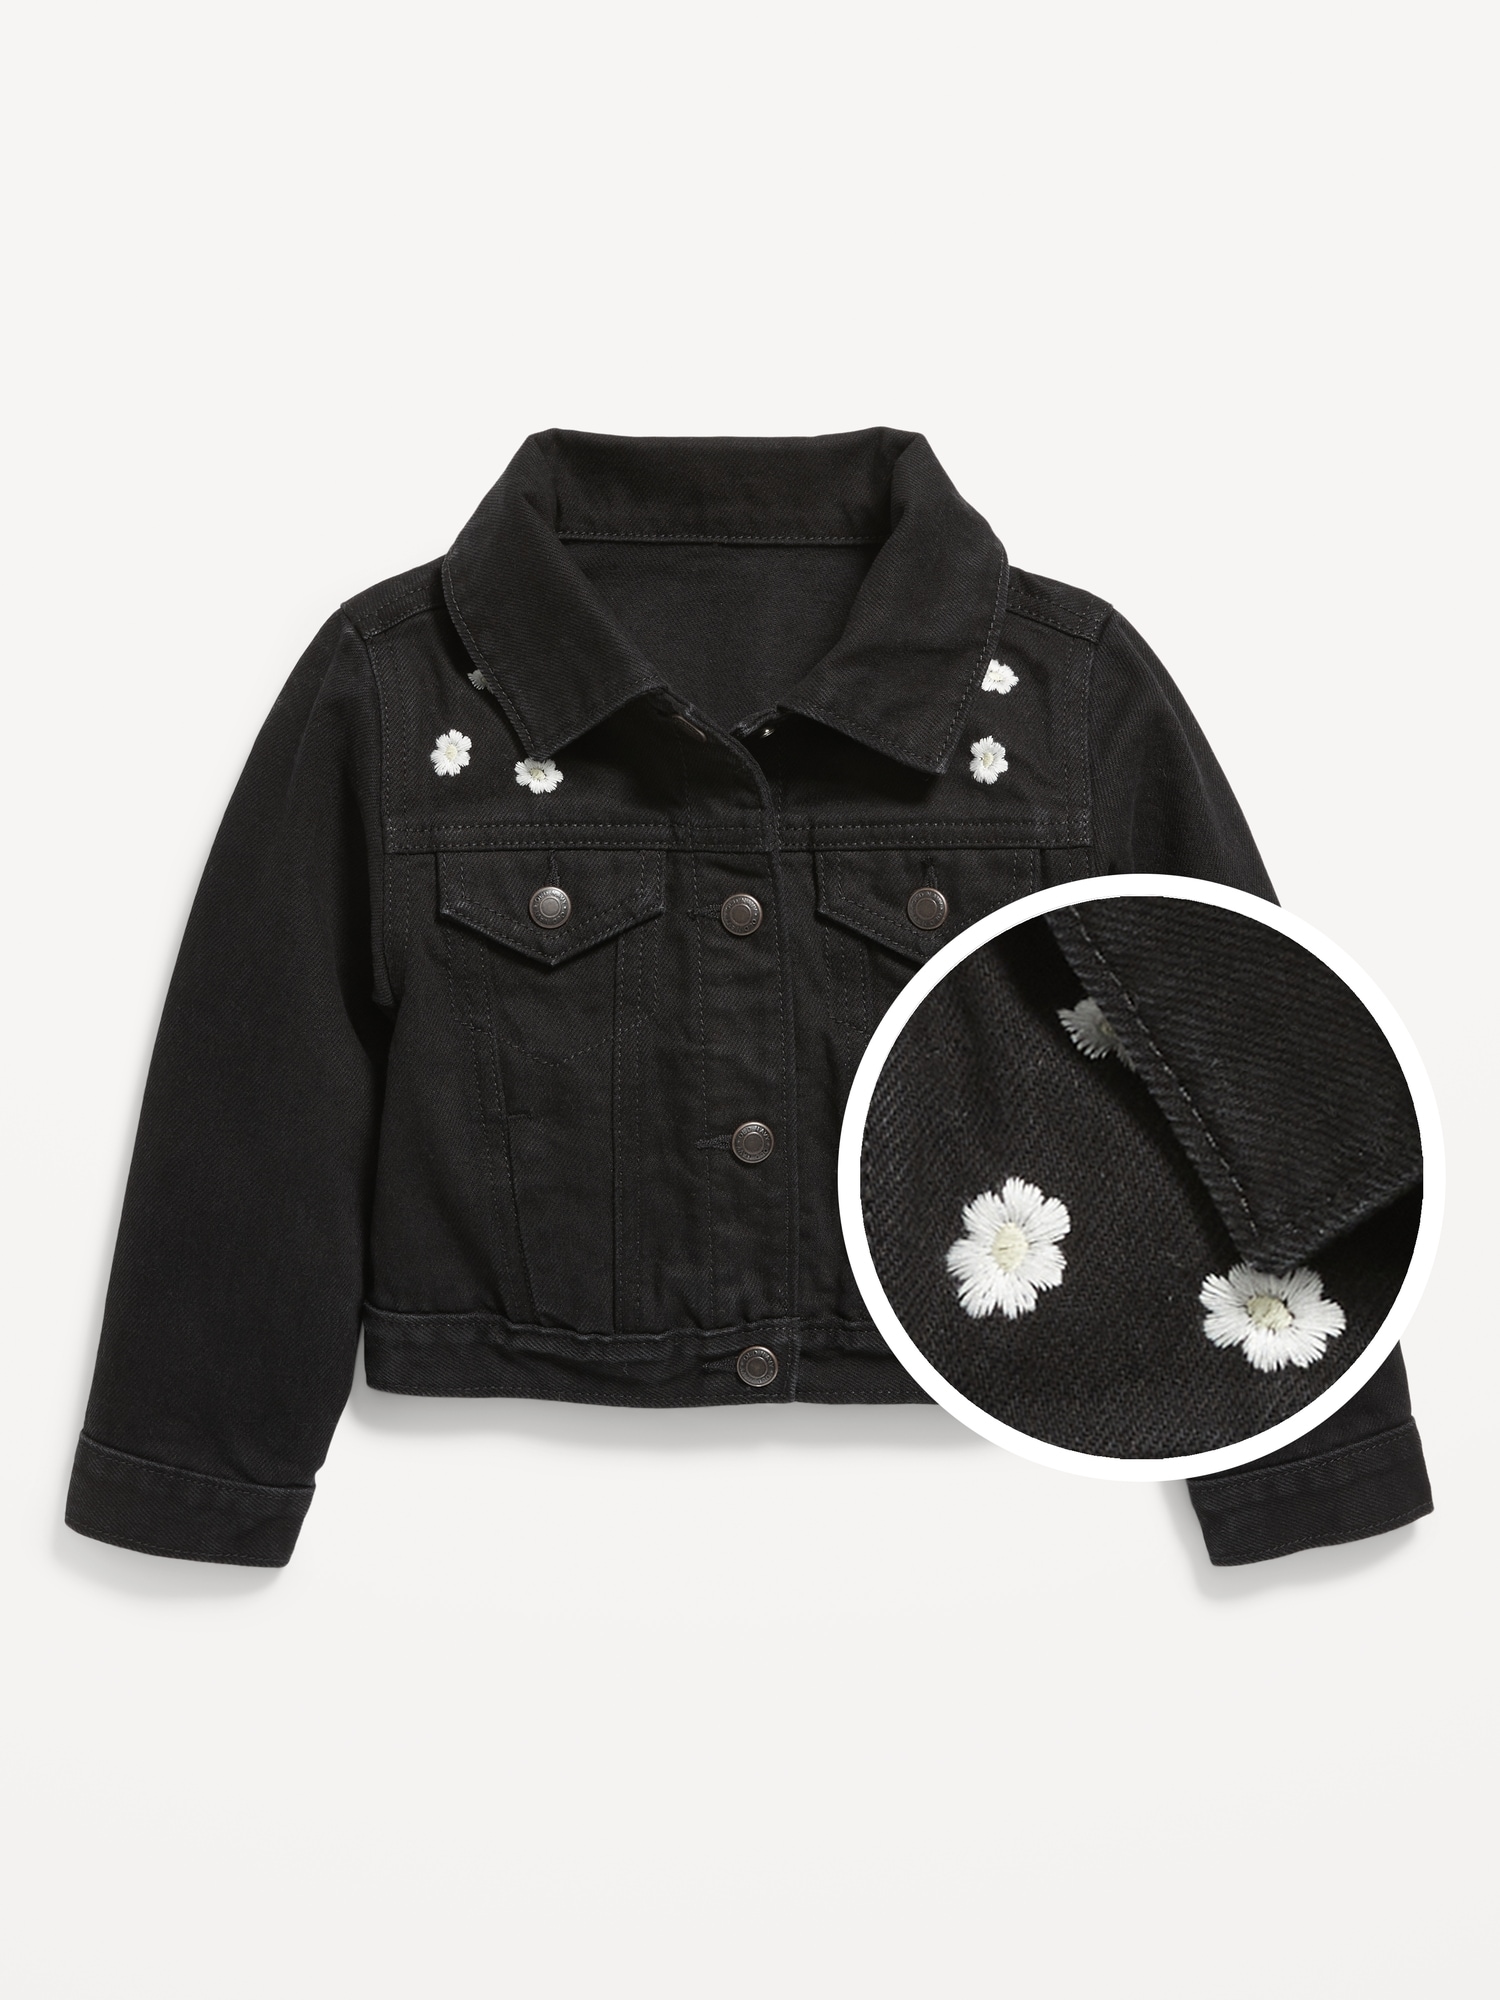 Cropped Embroidered Trucker Jean Jacket for Toddler Girls